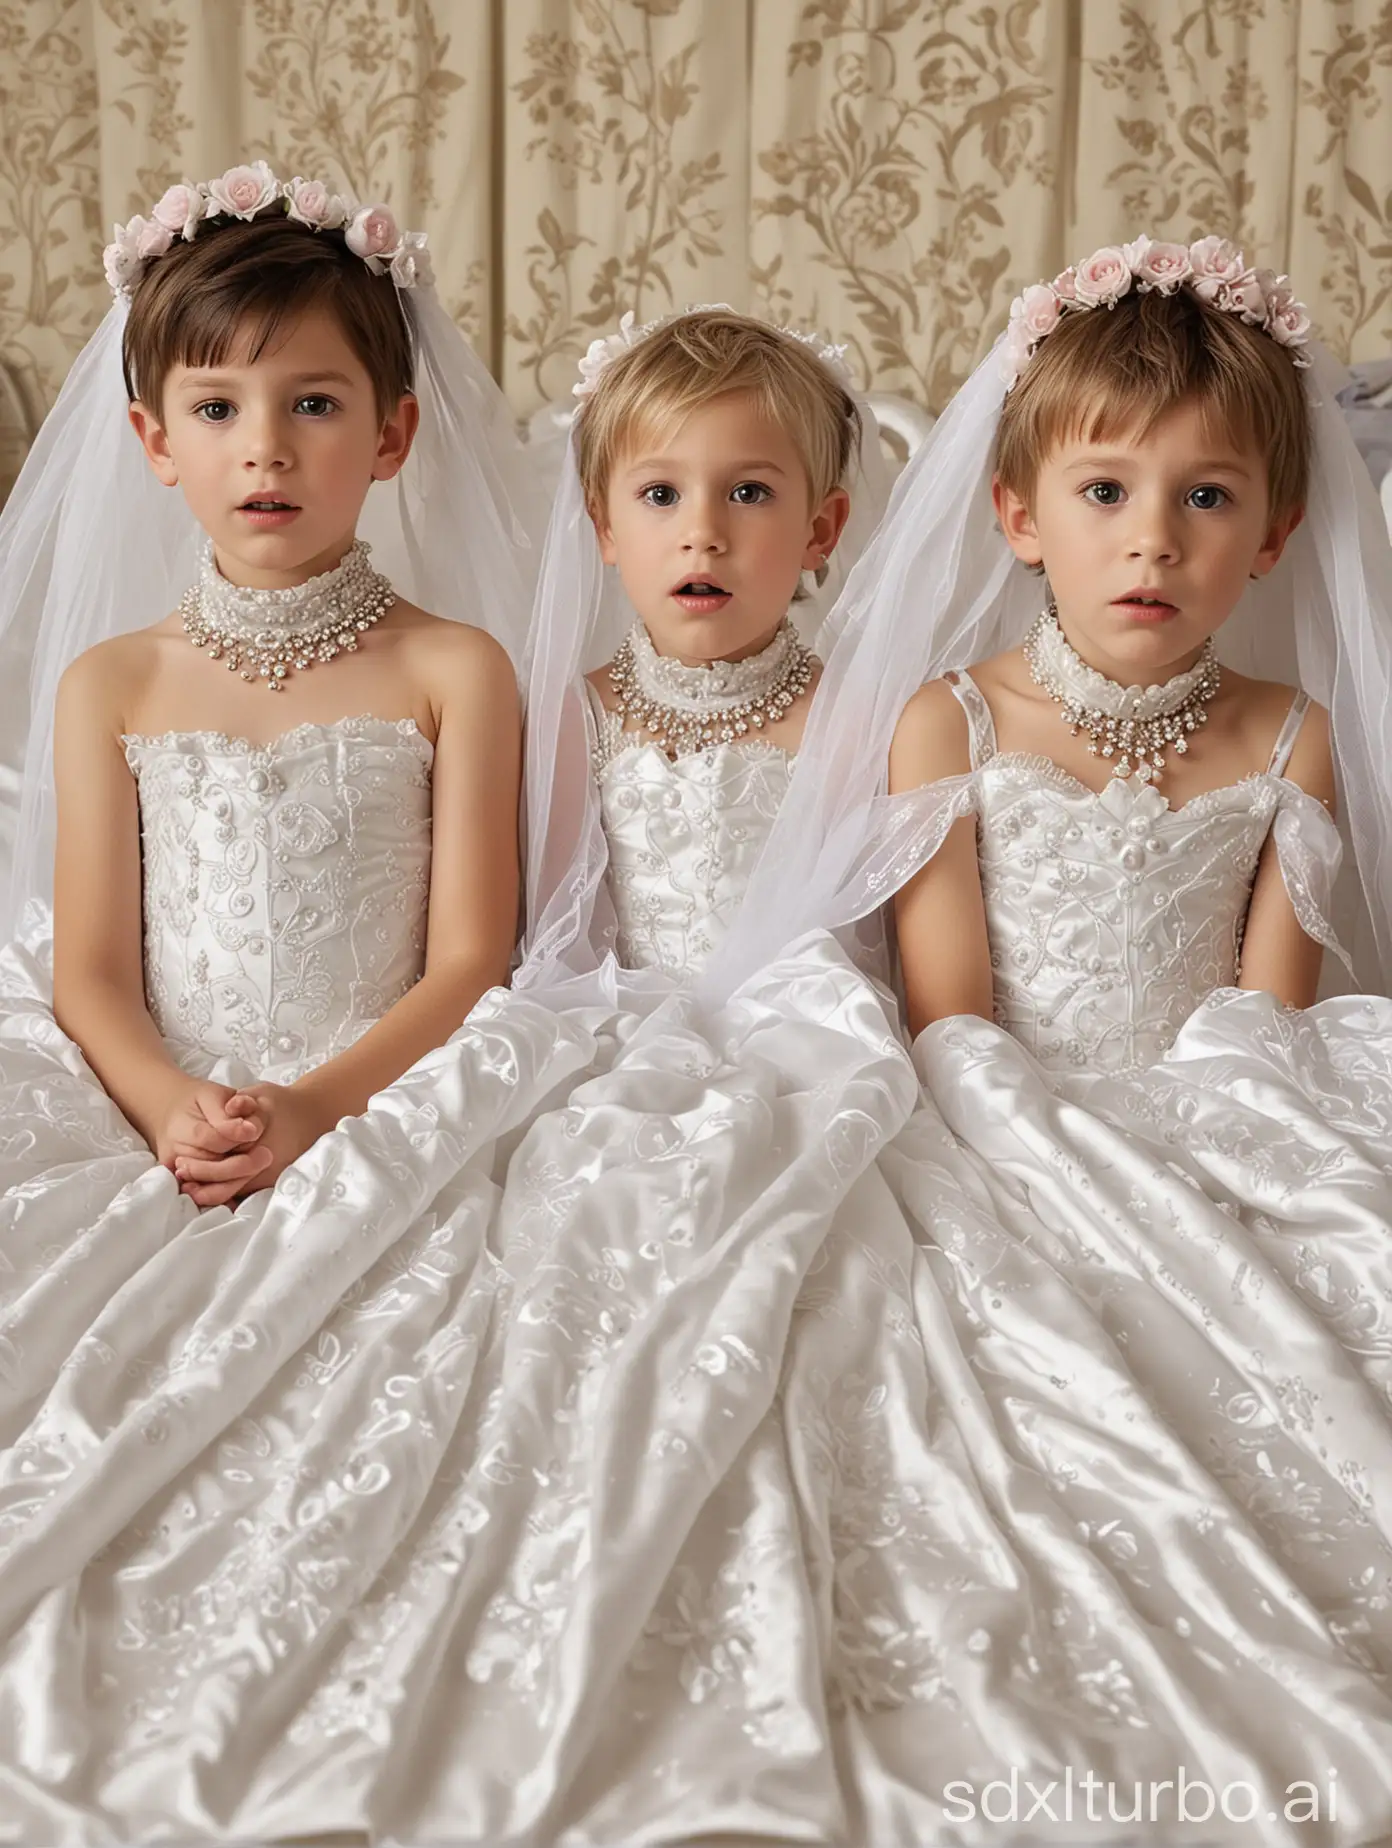 (((Gender role reversal))), 2 cute little boys (a 9-year-old boy and a 6-year-old boy) are waking up in bed, they are tired and confused to find themselves wearing extravagant princess-like wedding dresses with flowery textures and veils, choker necklaces with spikes on, short smart hair, they are looking down at their clothes, energetic